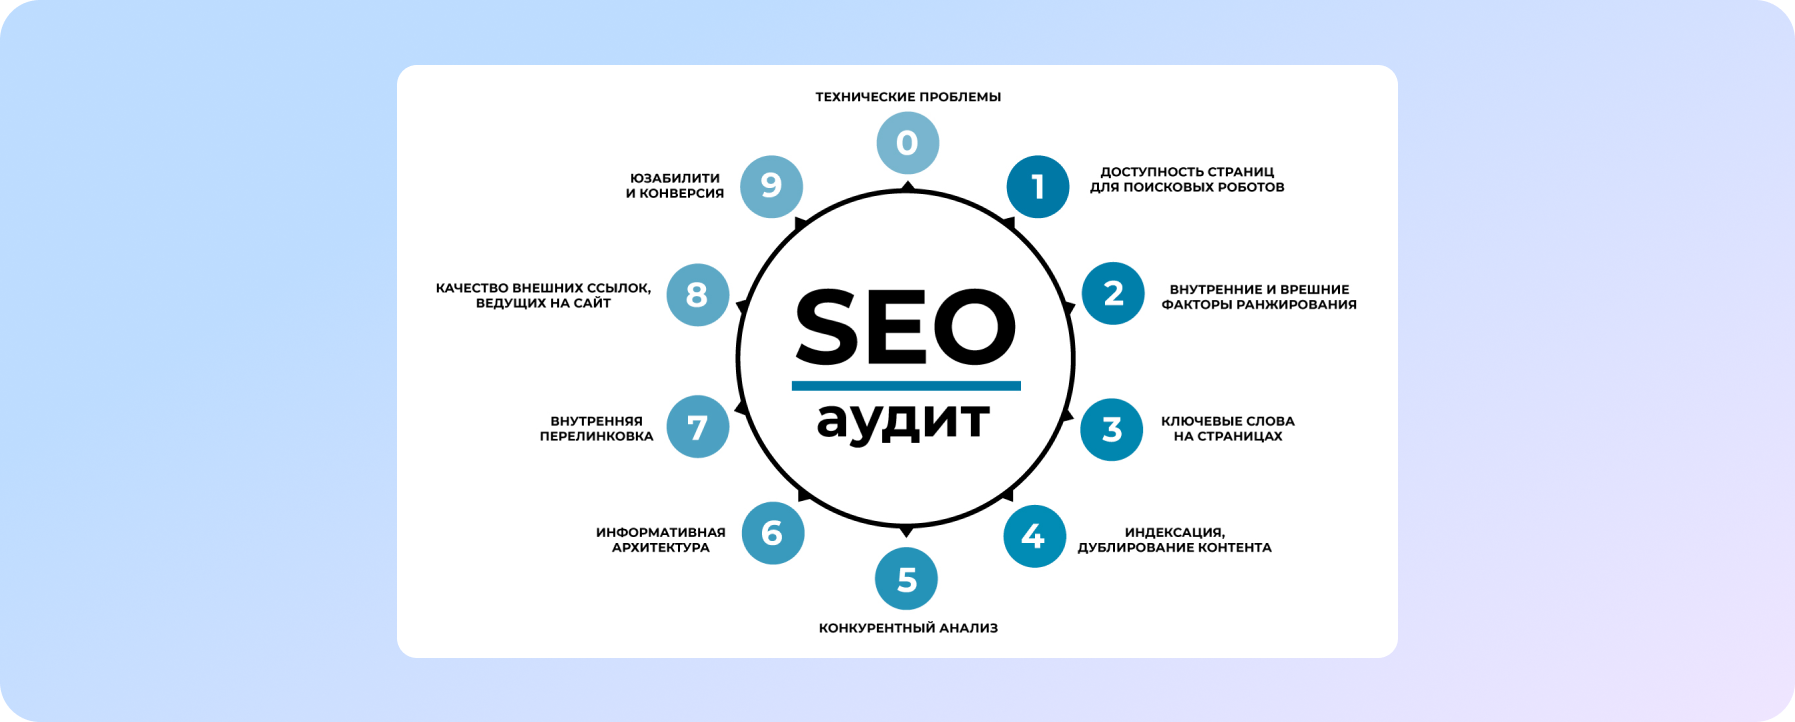 technical issues during SEO audit